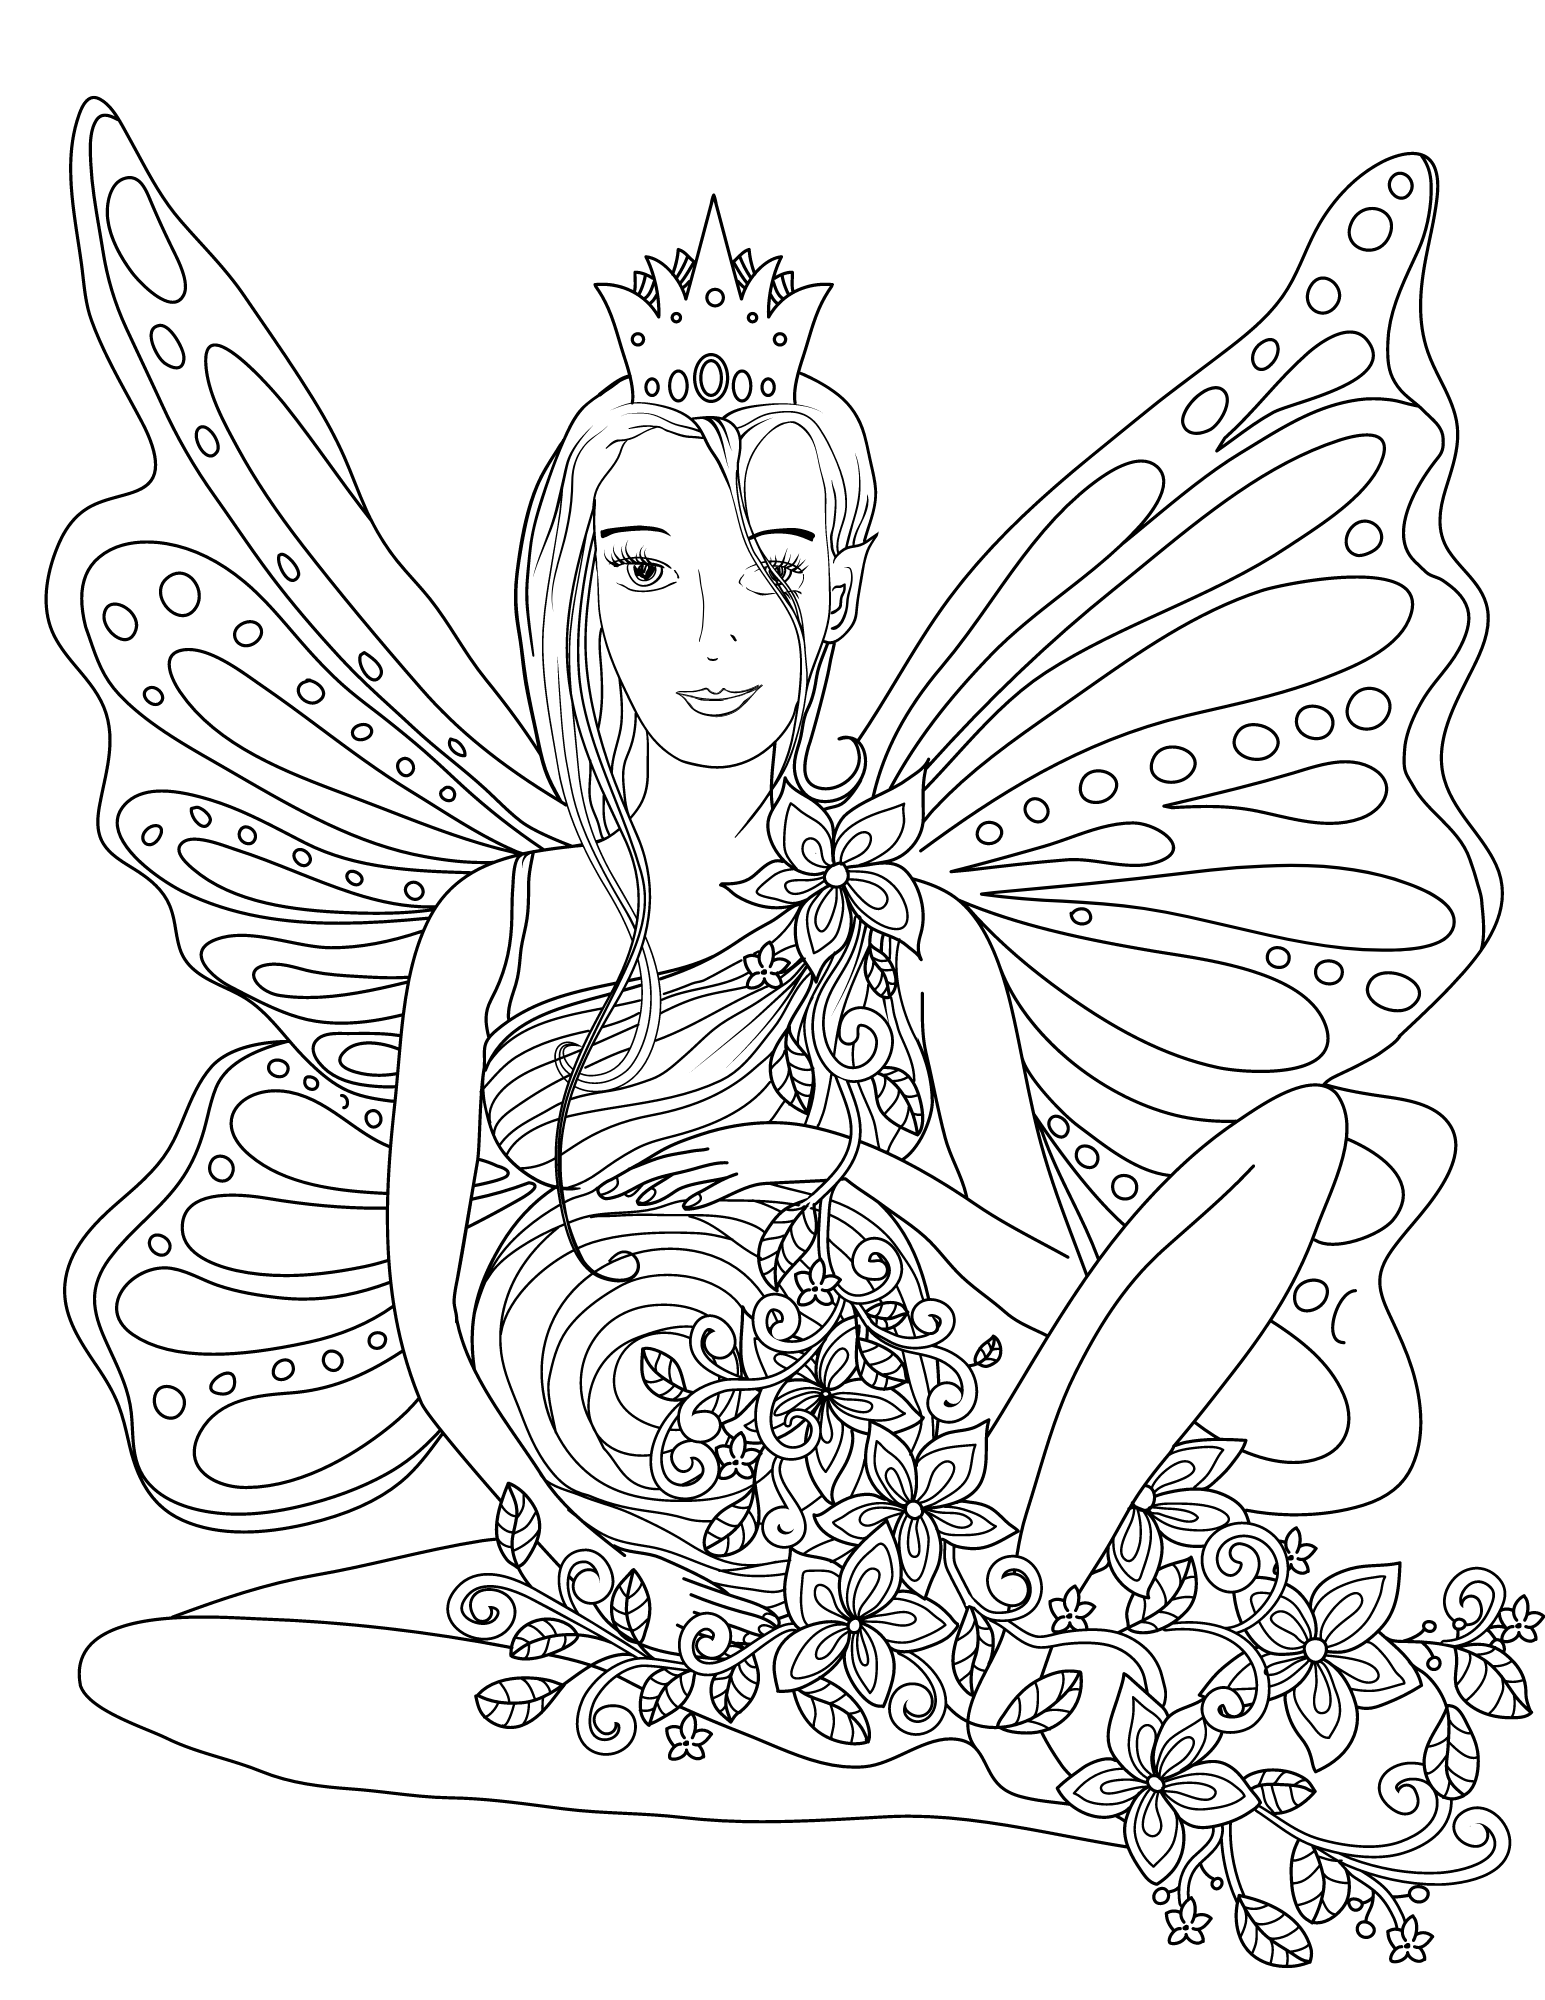 Free fairy coloring pages for kids and adults